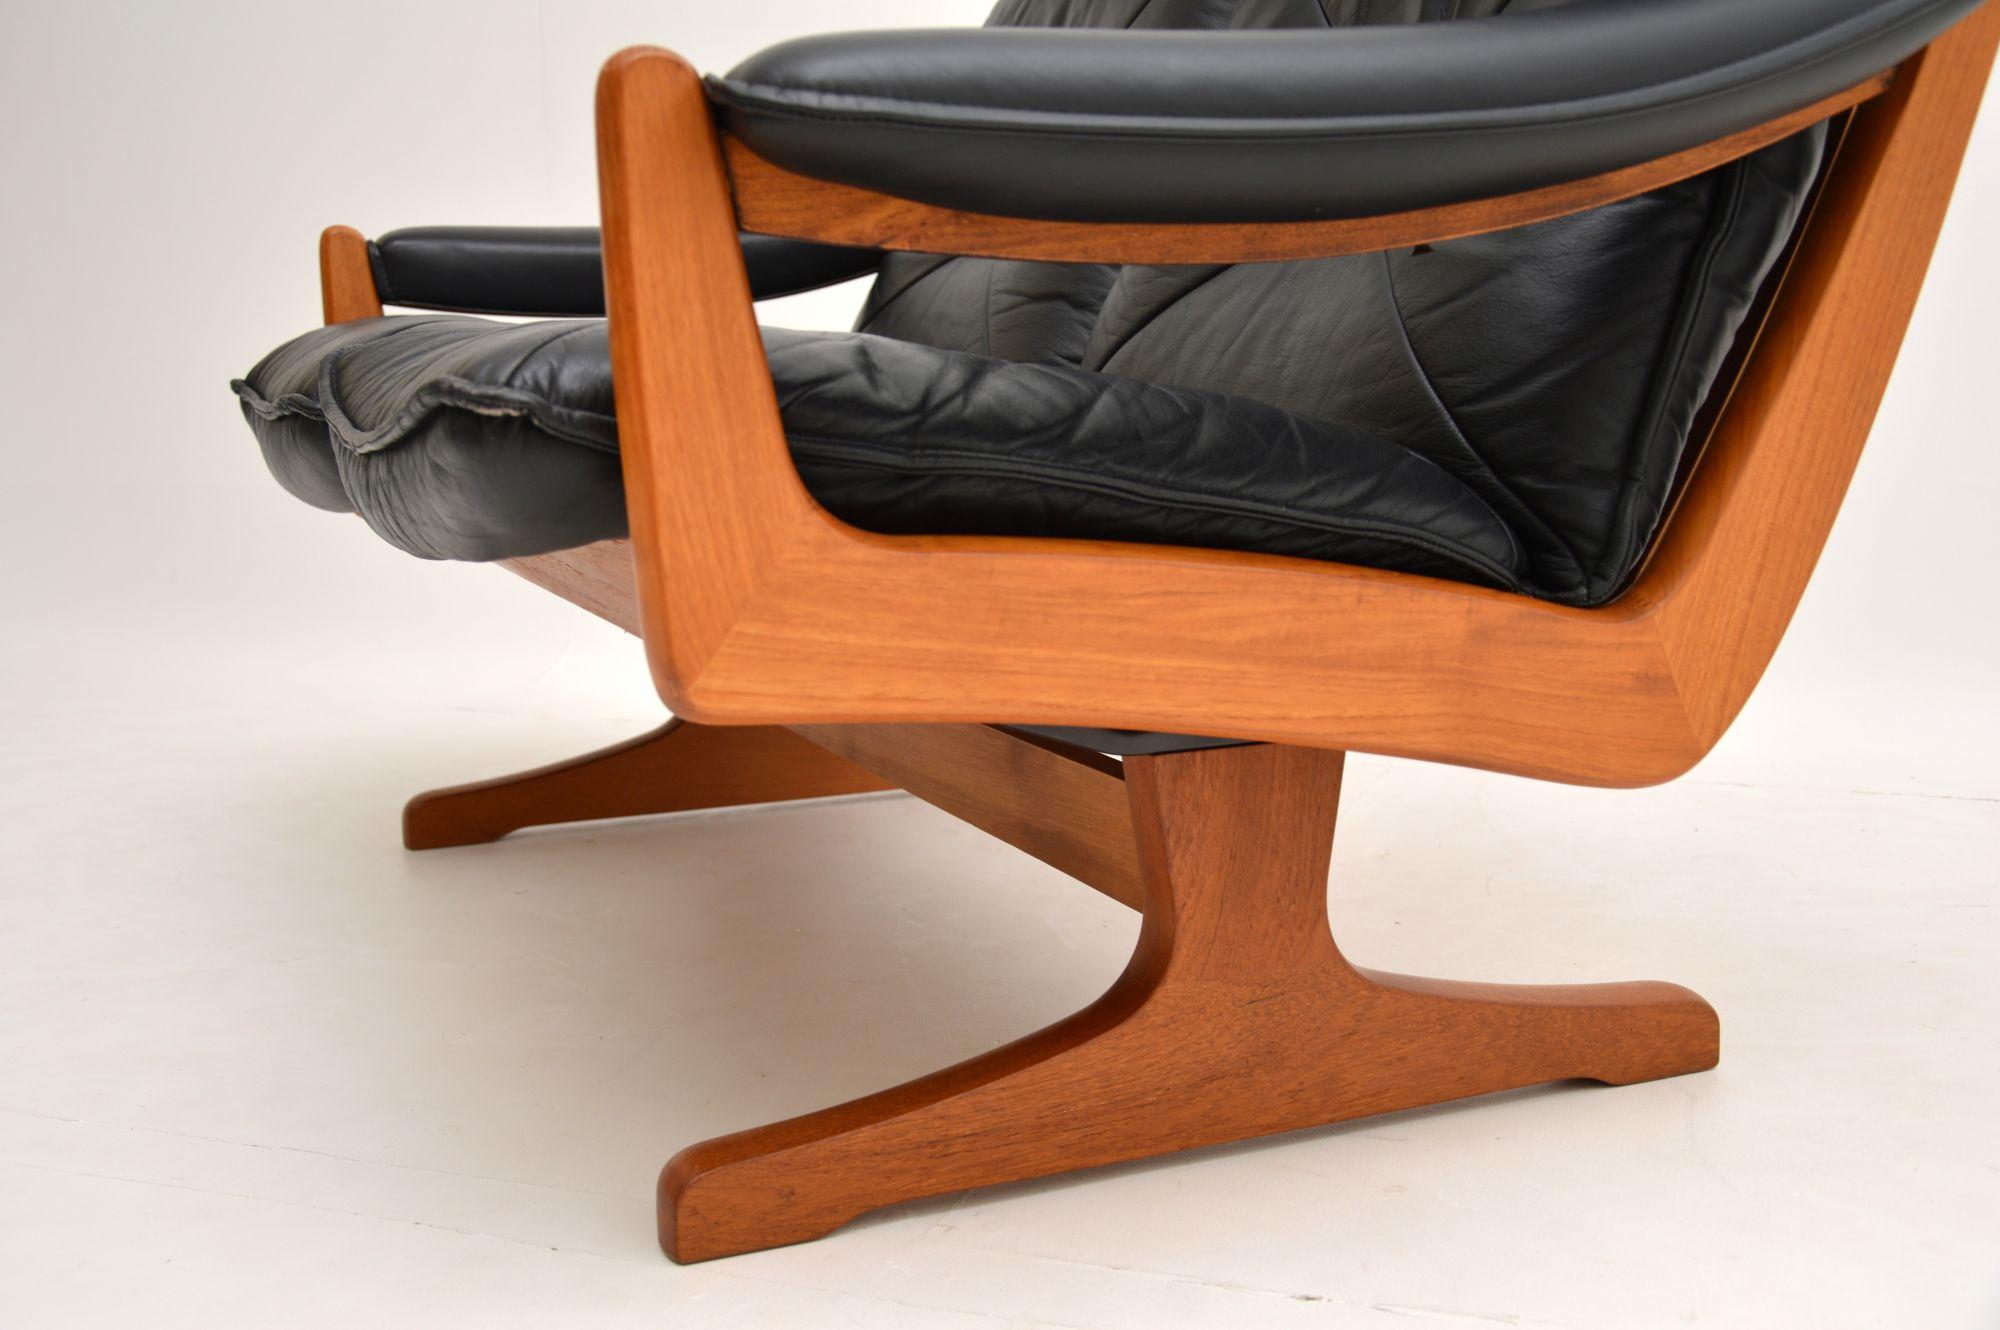 1970s Vintage Teak and Leather Sofa by Soda Galvano 1